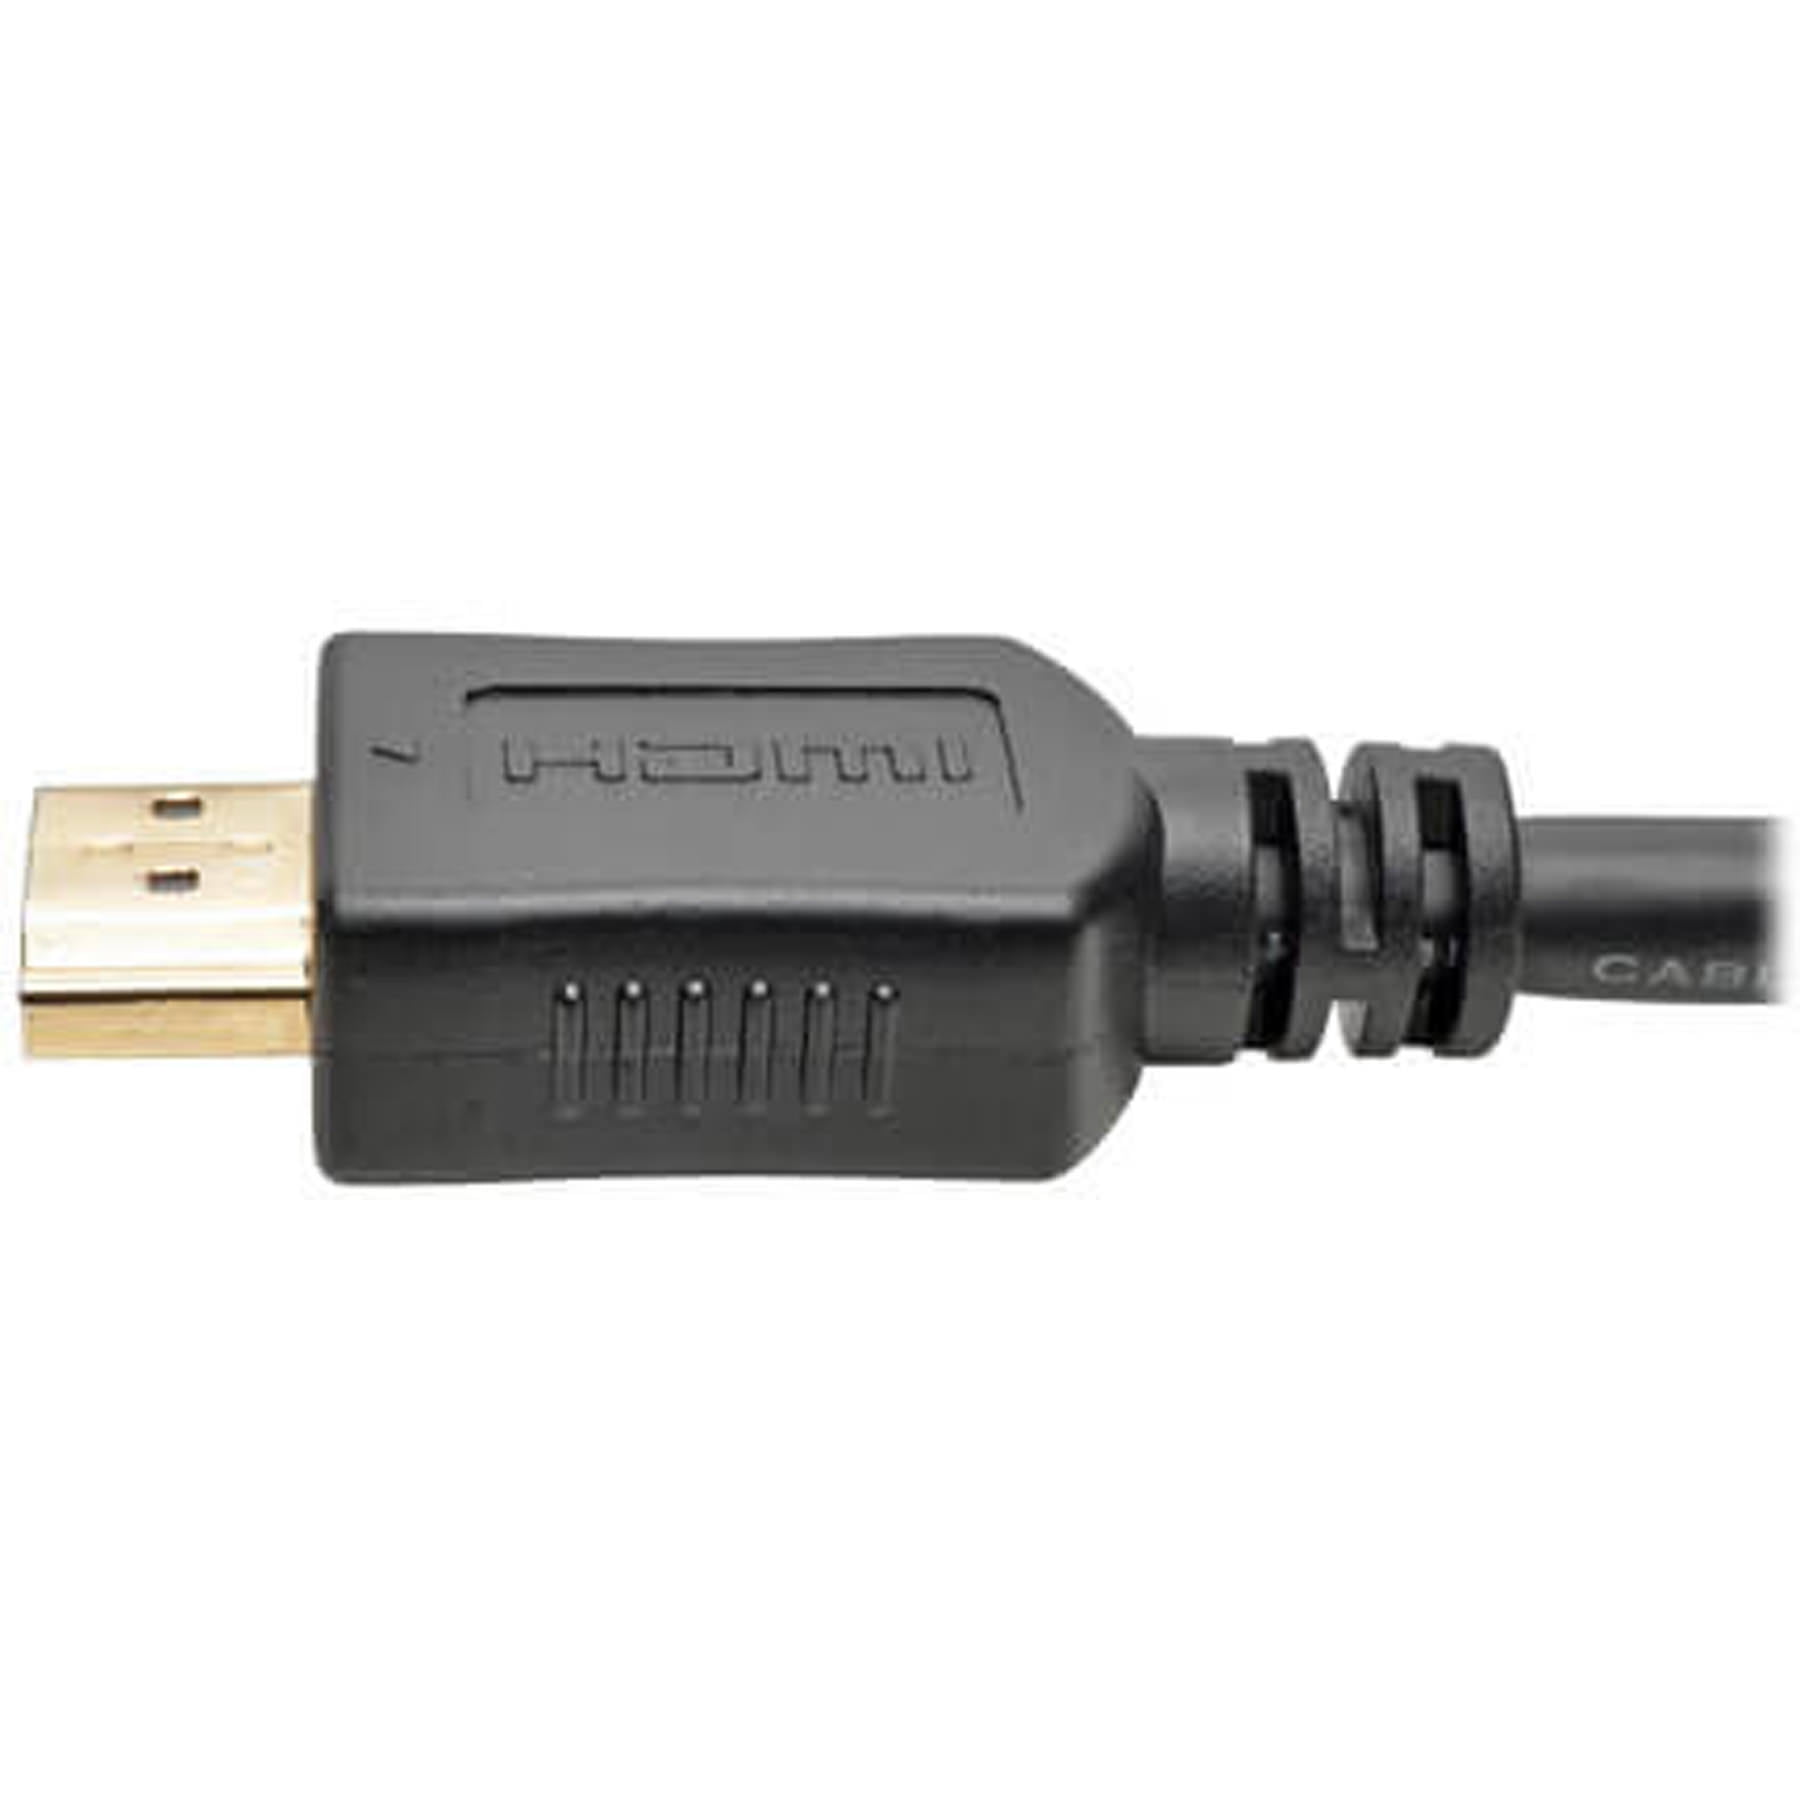 Audio Adapter Converter Cable Active Low Profile HD15 M/M 1080p @ 60Hz 15ft 15 P566-015-VGA Tripp Lite HDMI to VGA 